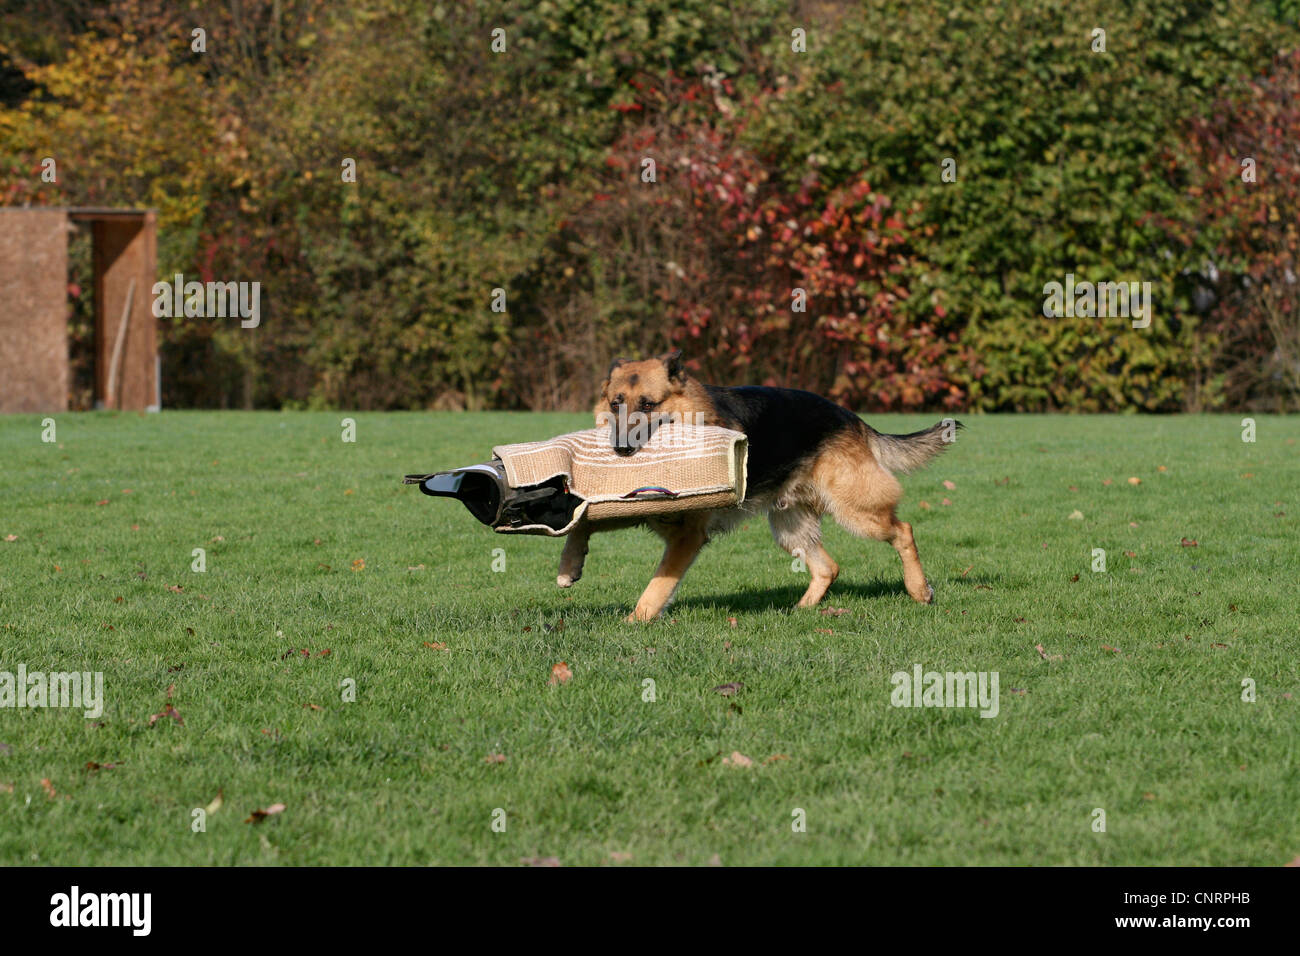 German Shepherd Dog (Canis lupus f. familiaris), running with a protective sleeve across a meadow Stock Photo